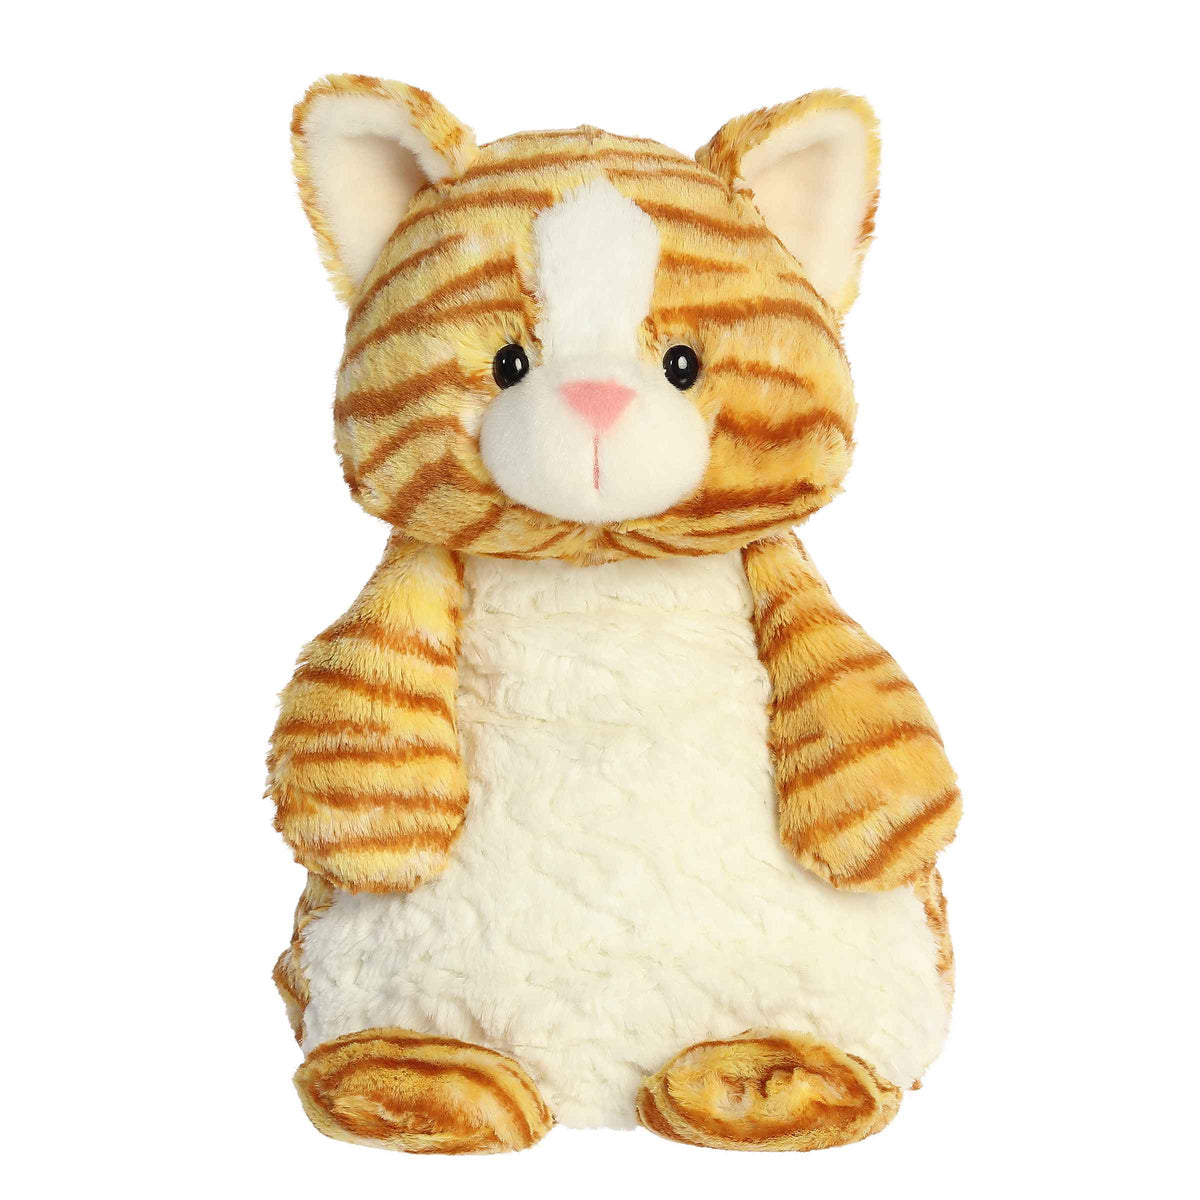 Comfy Kitty plush, striped ginger fur and fluffy white belly, seated with sweet eyes and a pink nose from Huggle Pals